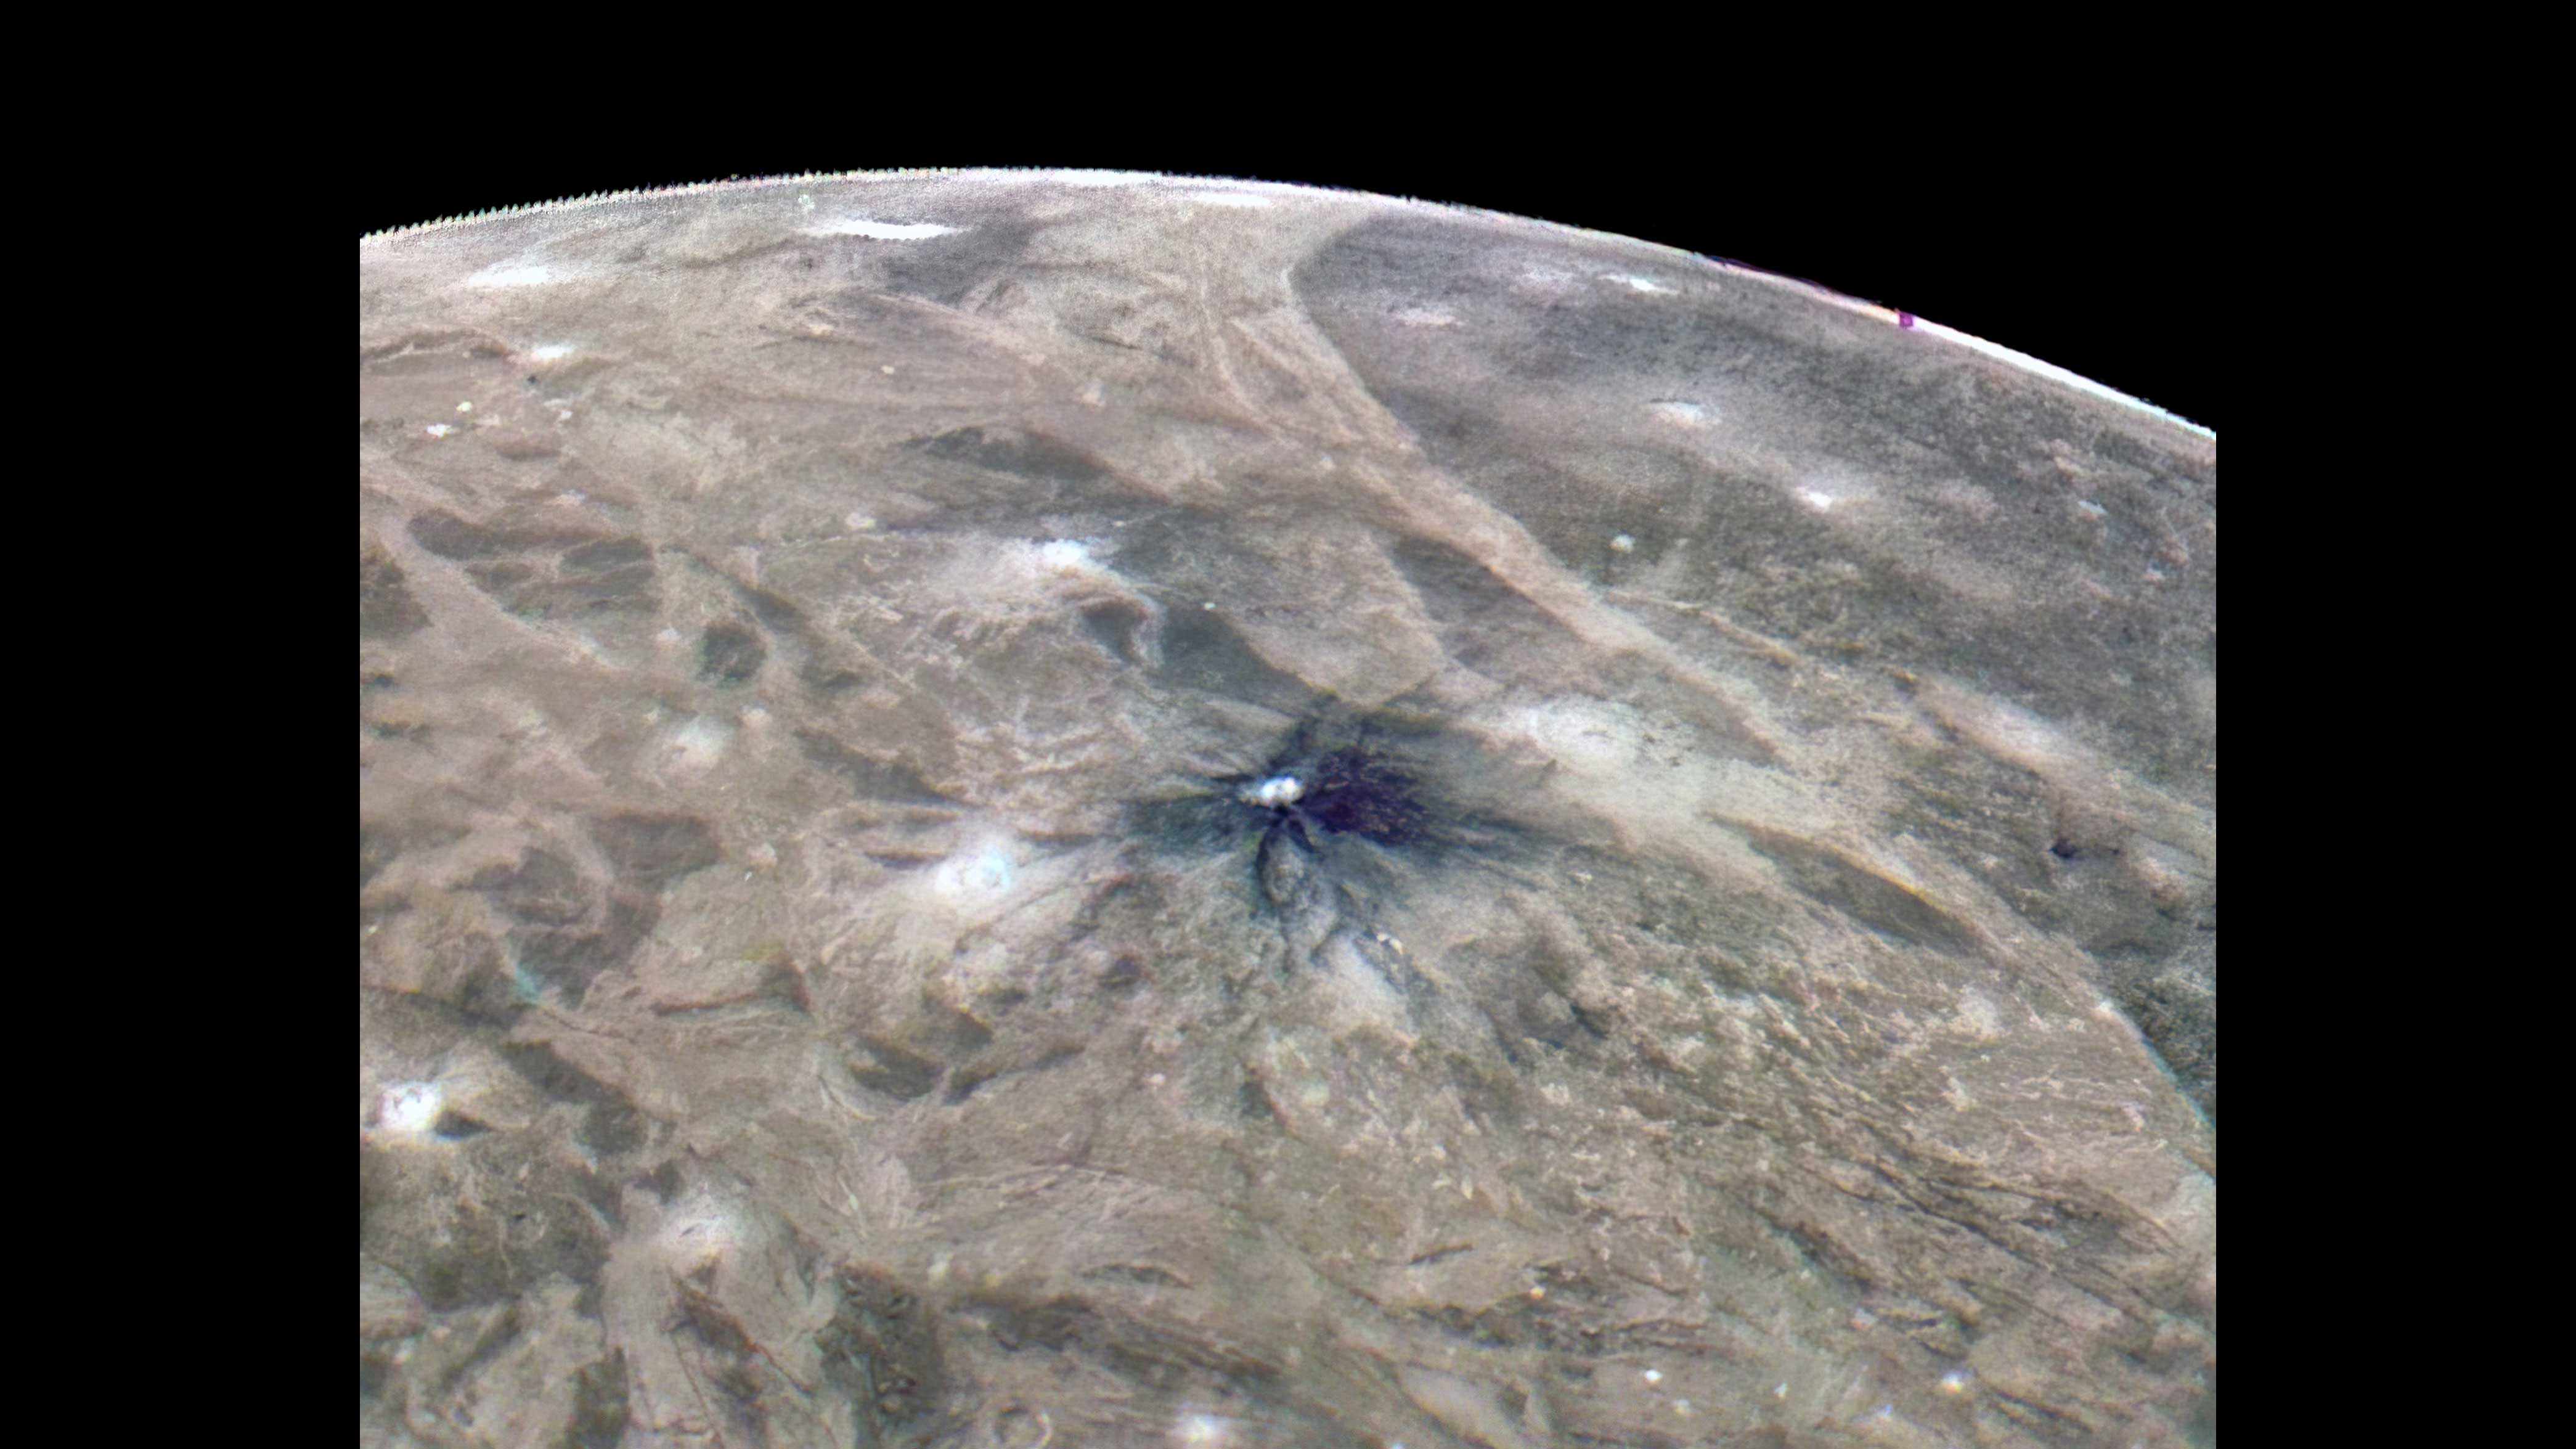 This look at the complex surface of Jupiter’s moon Ganymede came from NASA’s Juno mission during a close pass in June 2021.